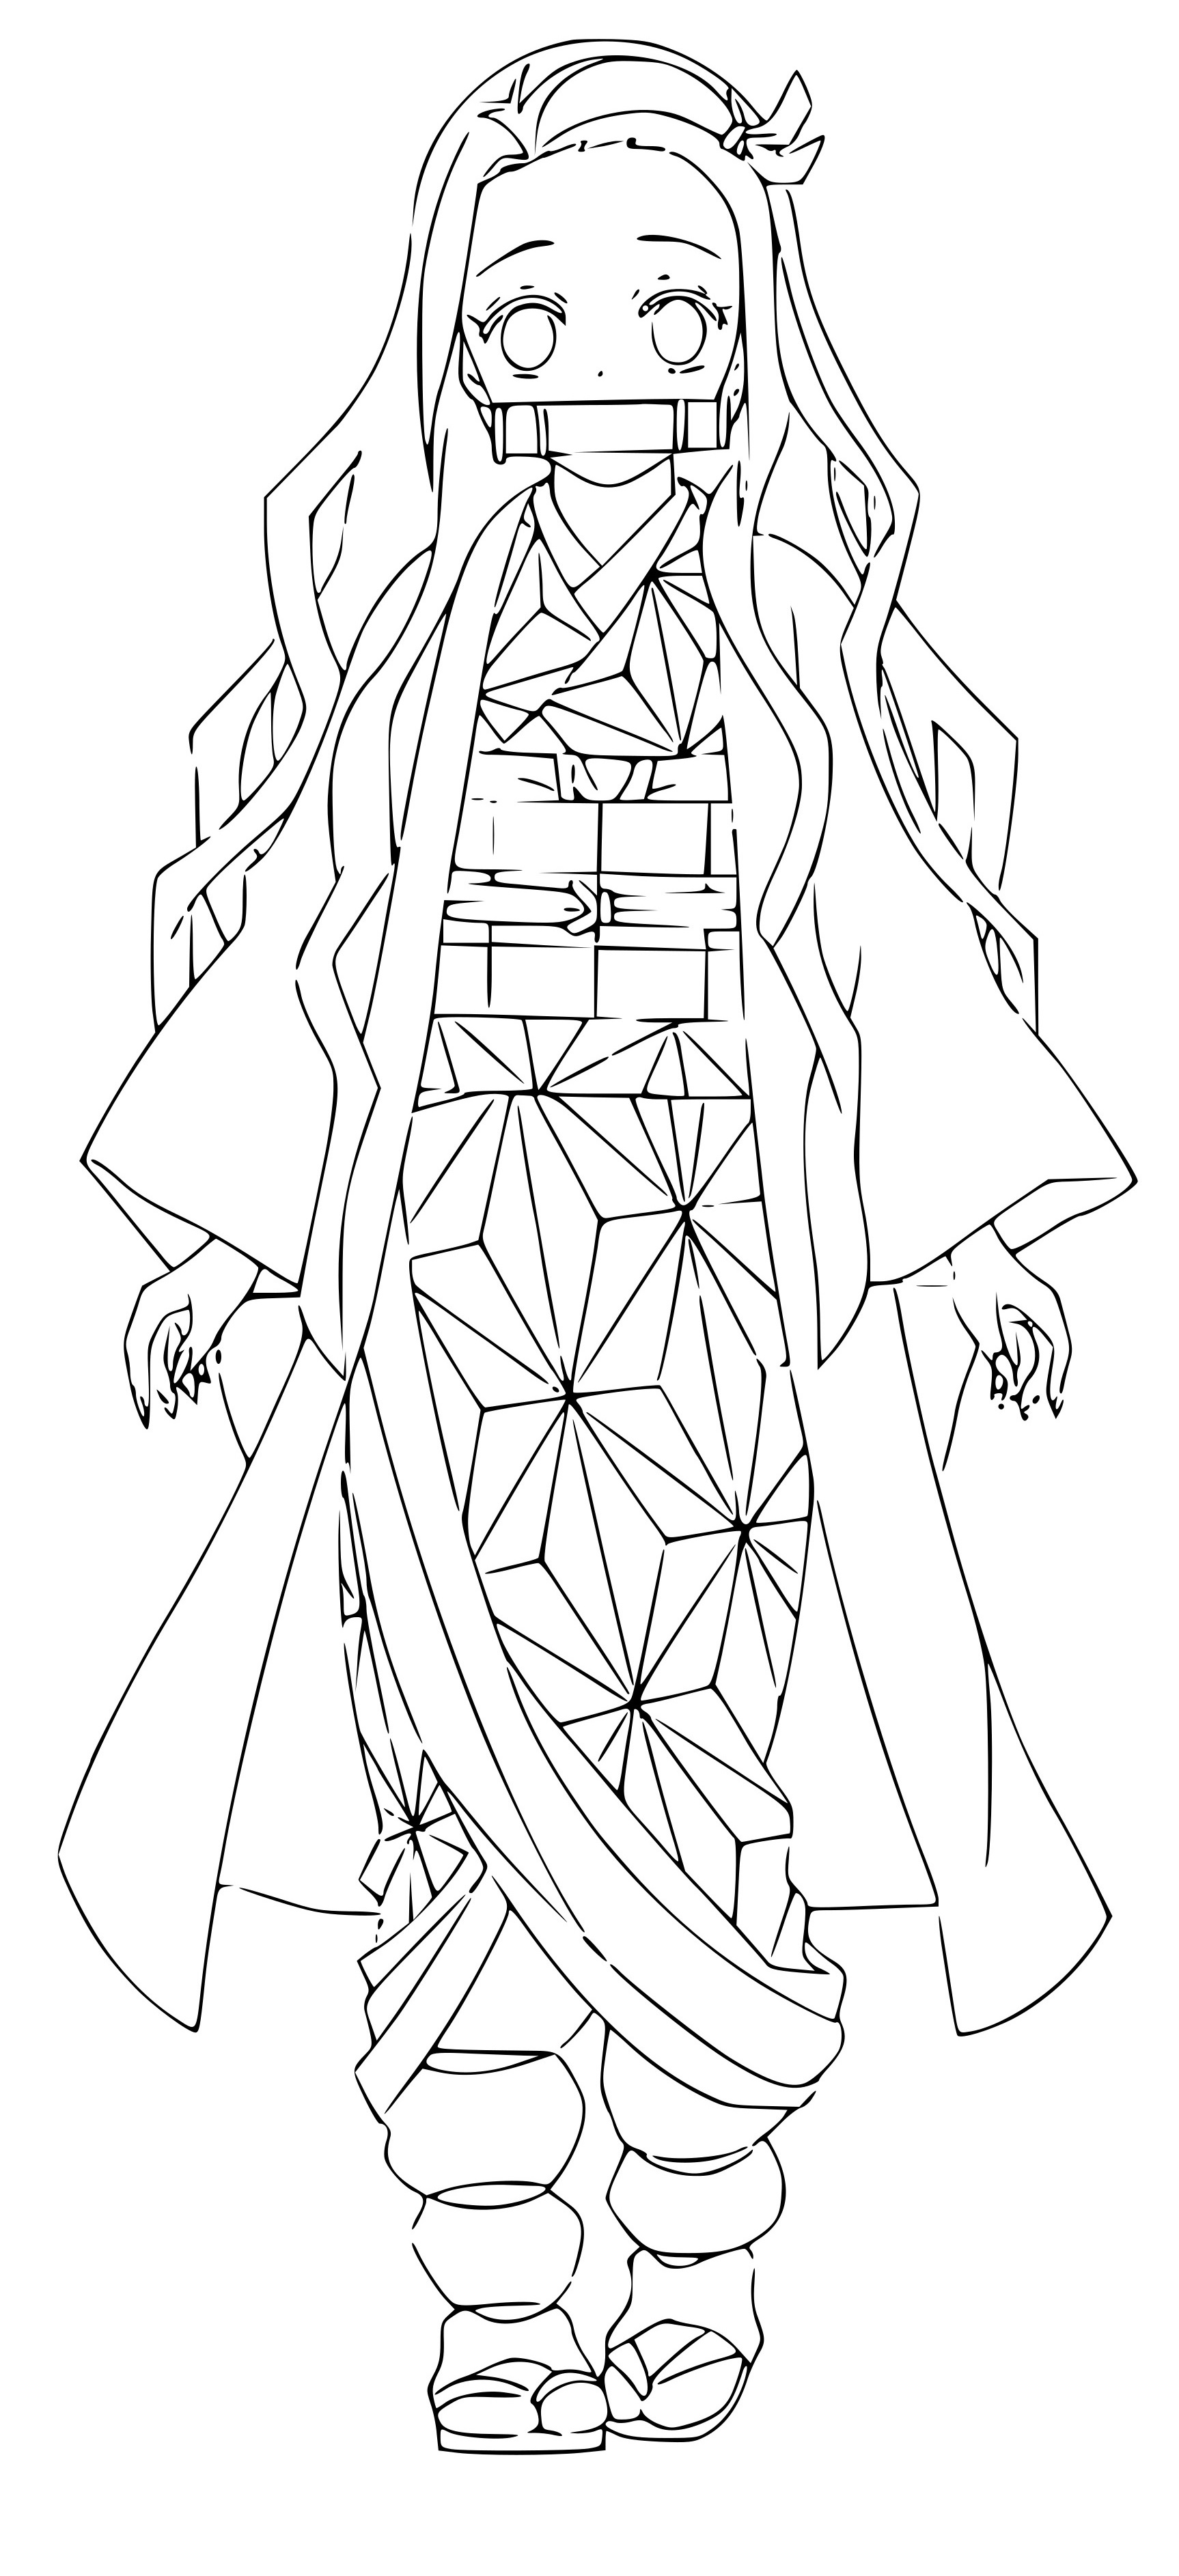 Full Length Nezuko Demon Slayer Coloring Pages - Coloring Cool